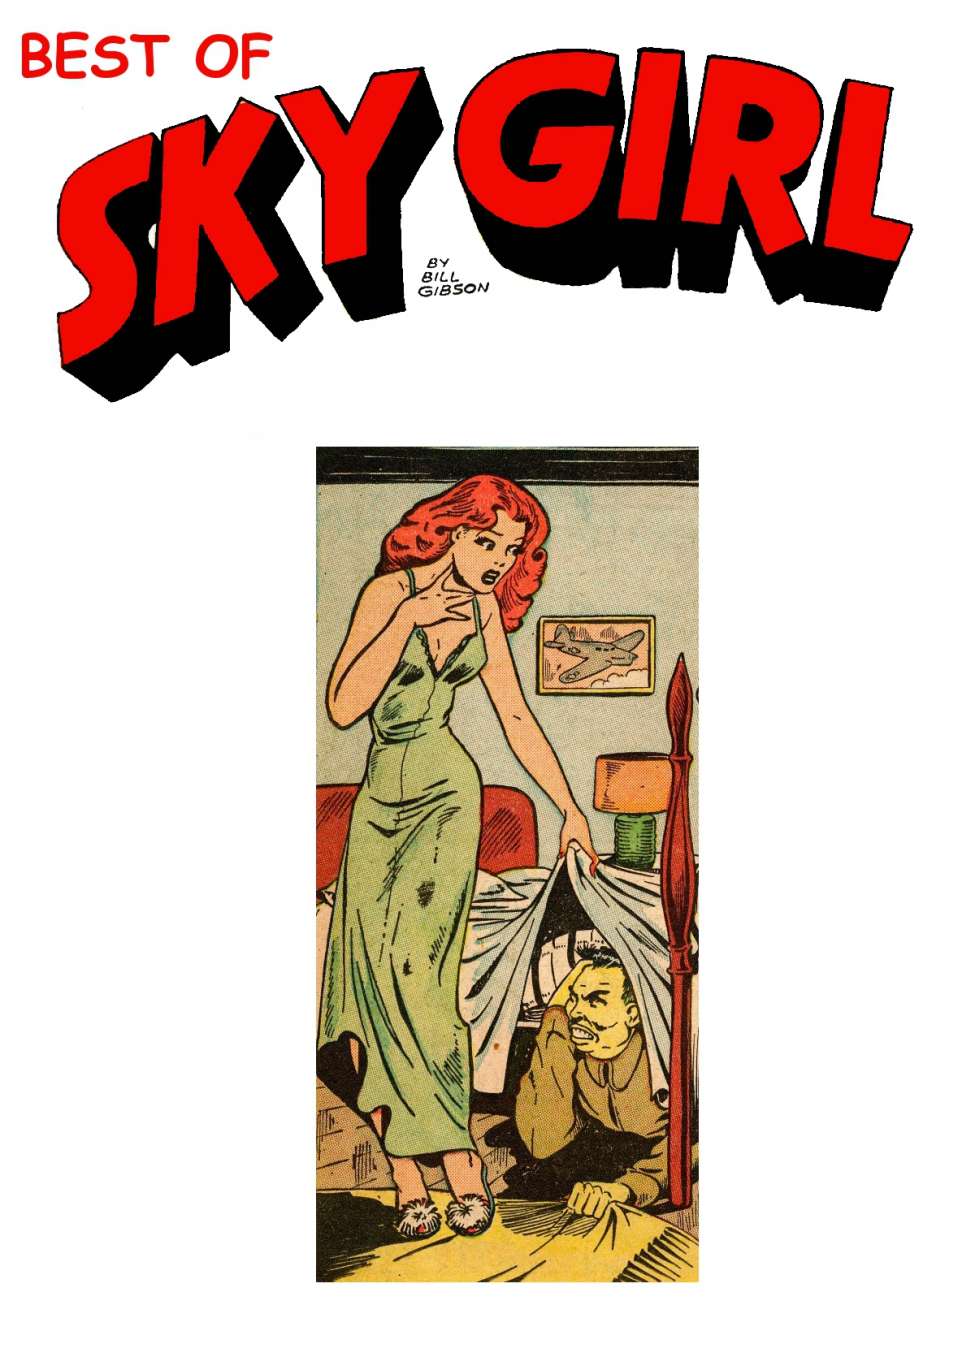 Comic Book Cover For Sky Girl Collection, The Best of (Fiction House)